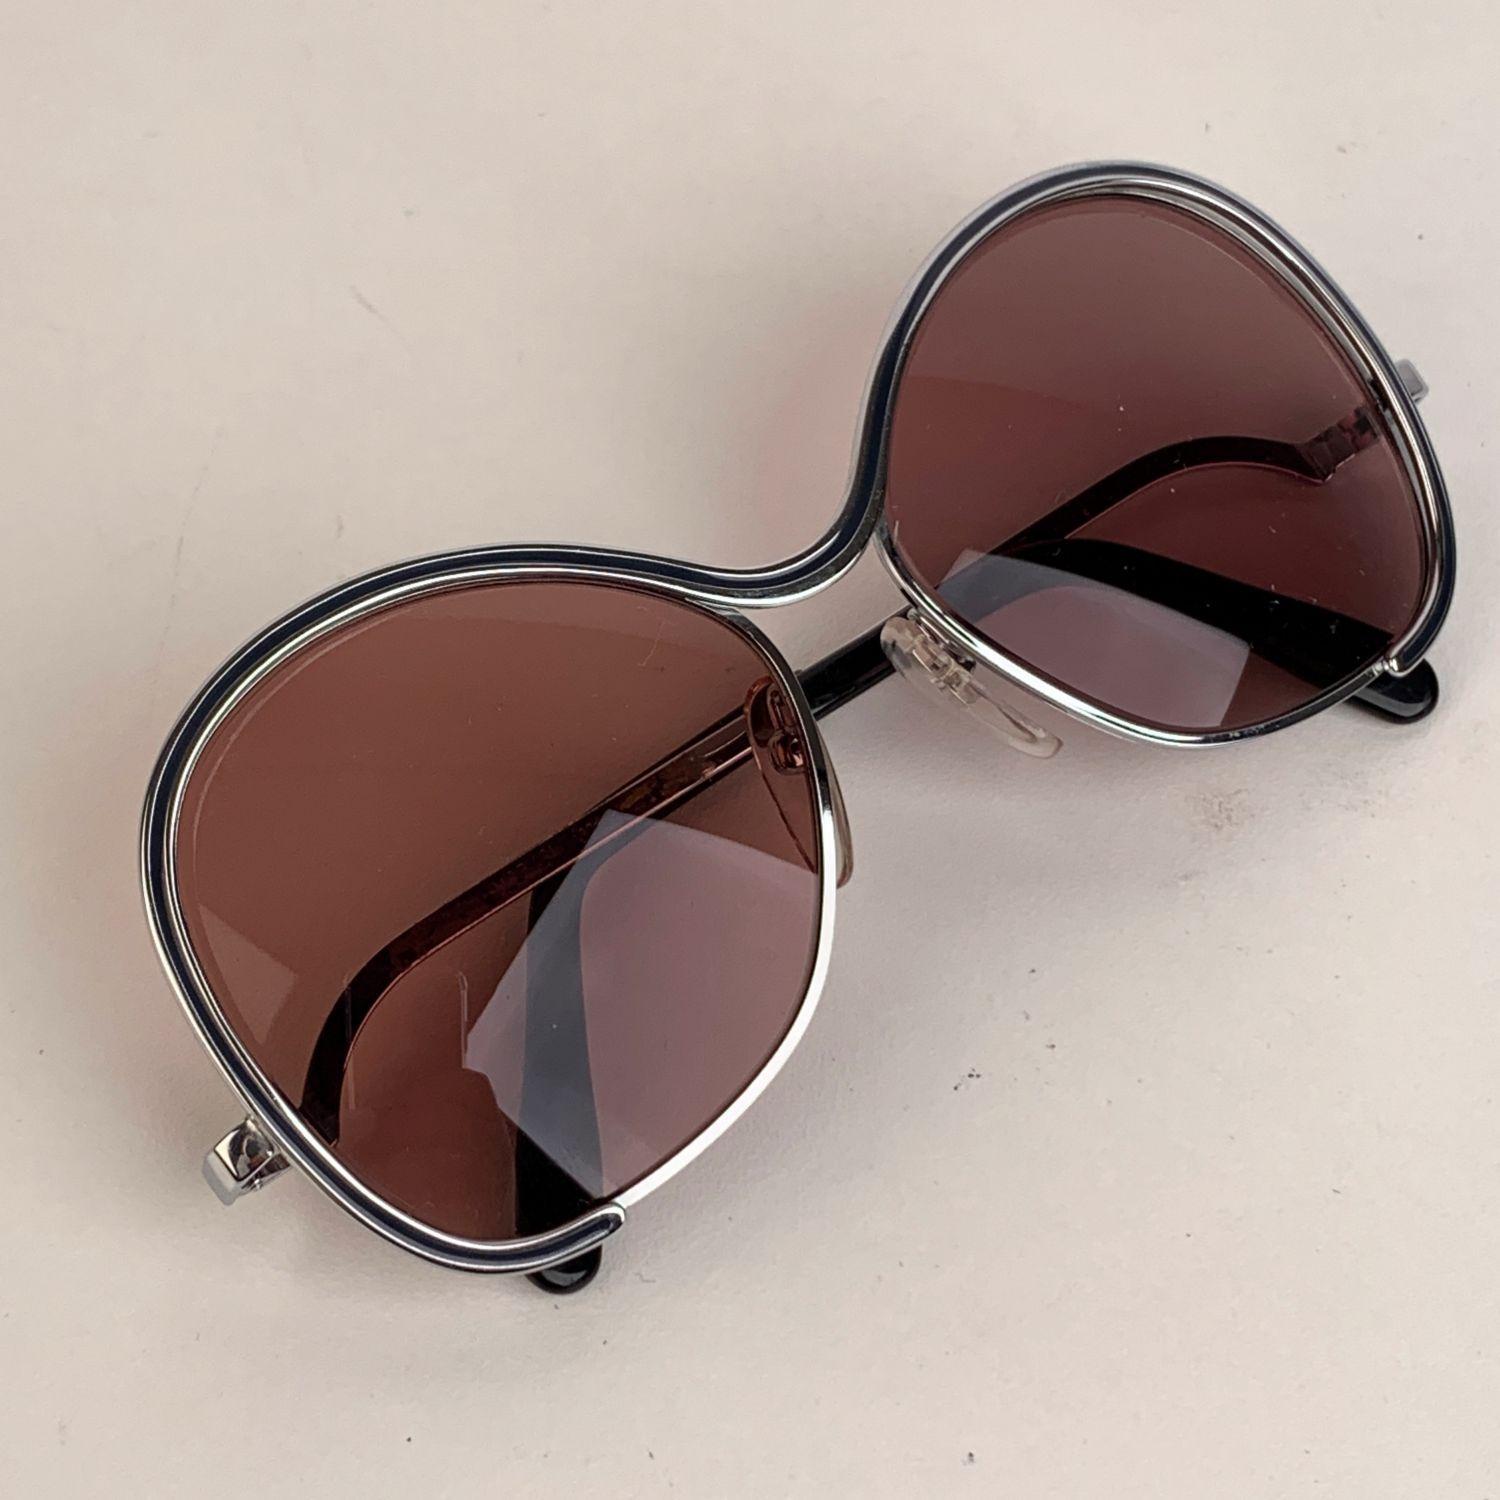 Rare vintage Silhouette silver metal sunglasses. mod. 431. New violet lenses with 100% UVA/UVB protection. Adjstable nose pads. Mod. & Refs: 431. Made in Austria



Details

MATERIAL: Metal

COLOR: Silver

MODEL: 431

GENDER: Women

COUNTRY OF